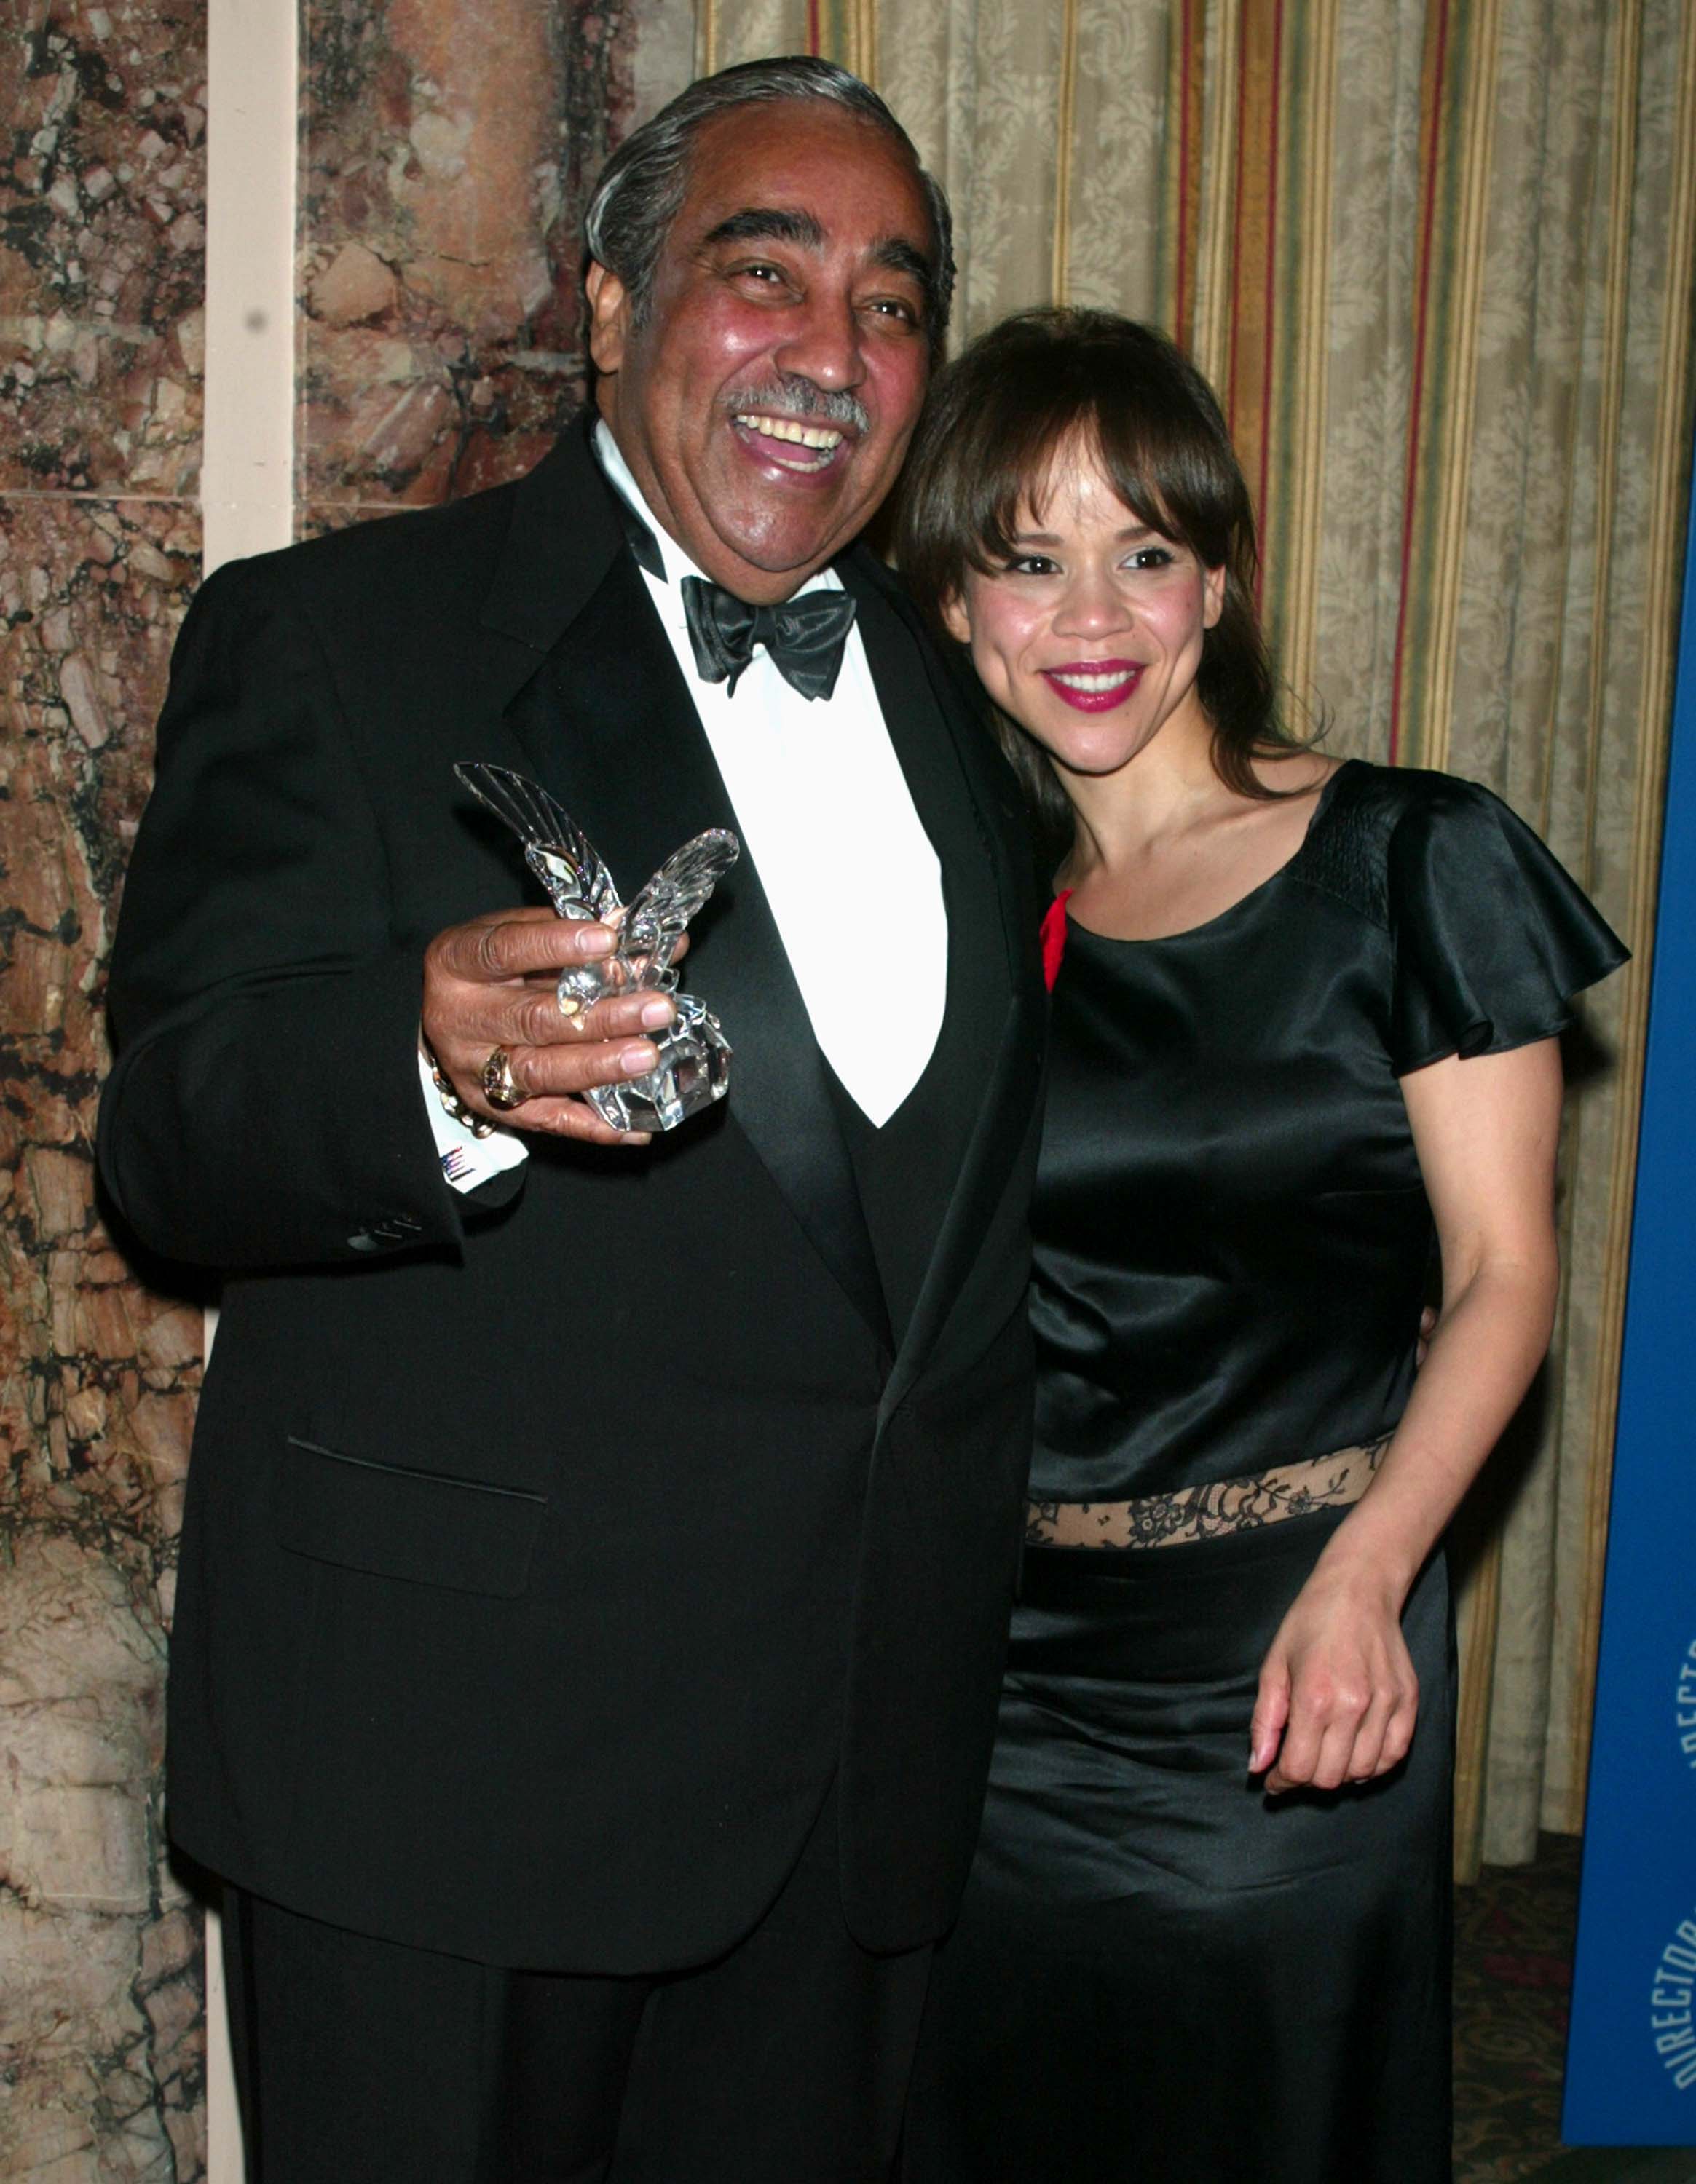 Rosie Perez and Congressman Charles Rangel at the Directors Guild of America dinner at the Waldorf Astoria in New York City, June 9, 2002.